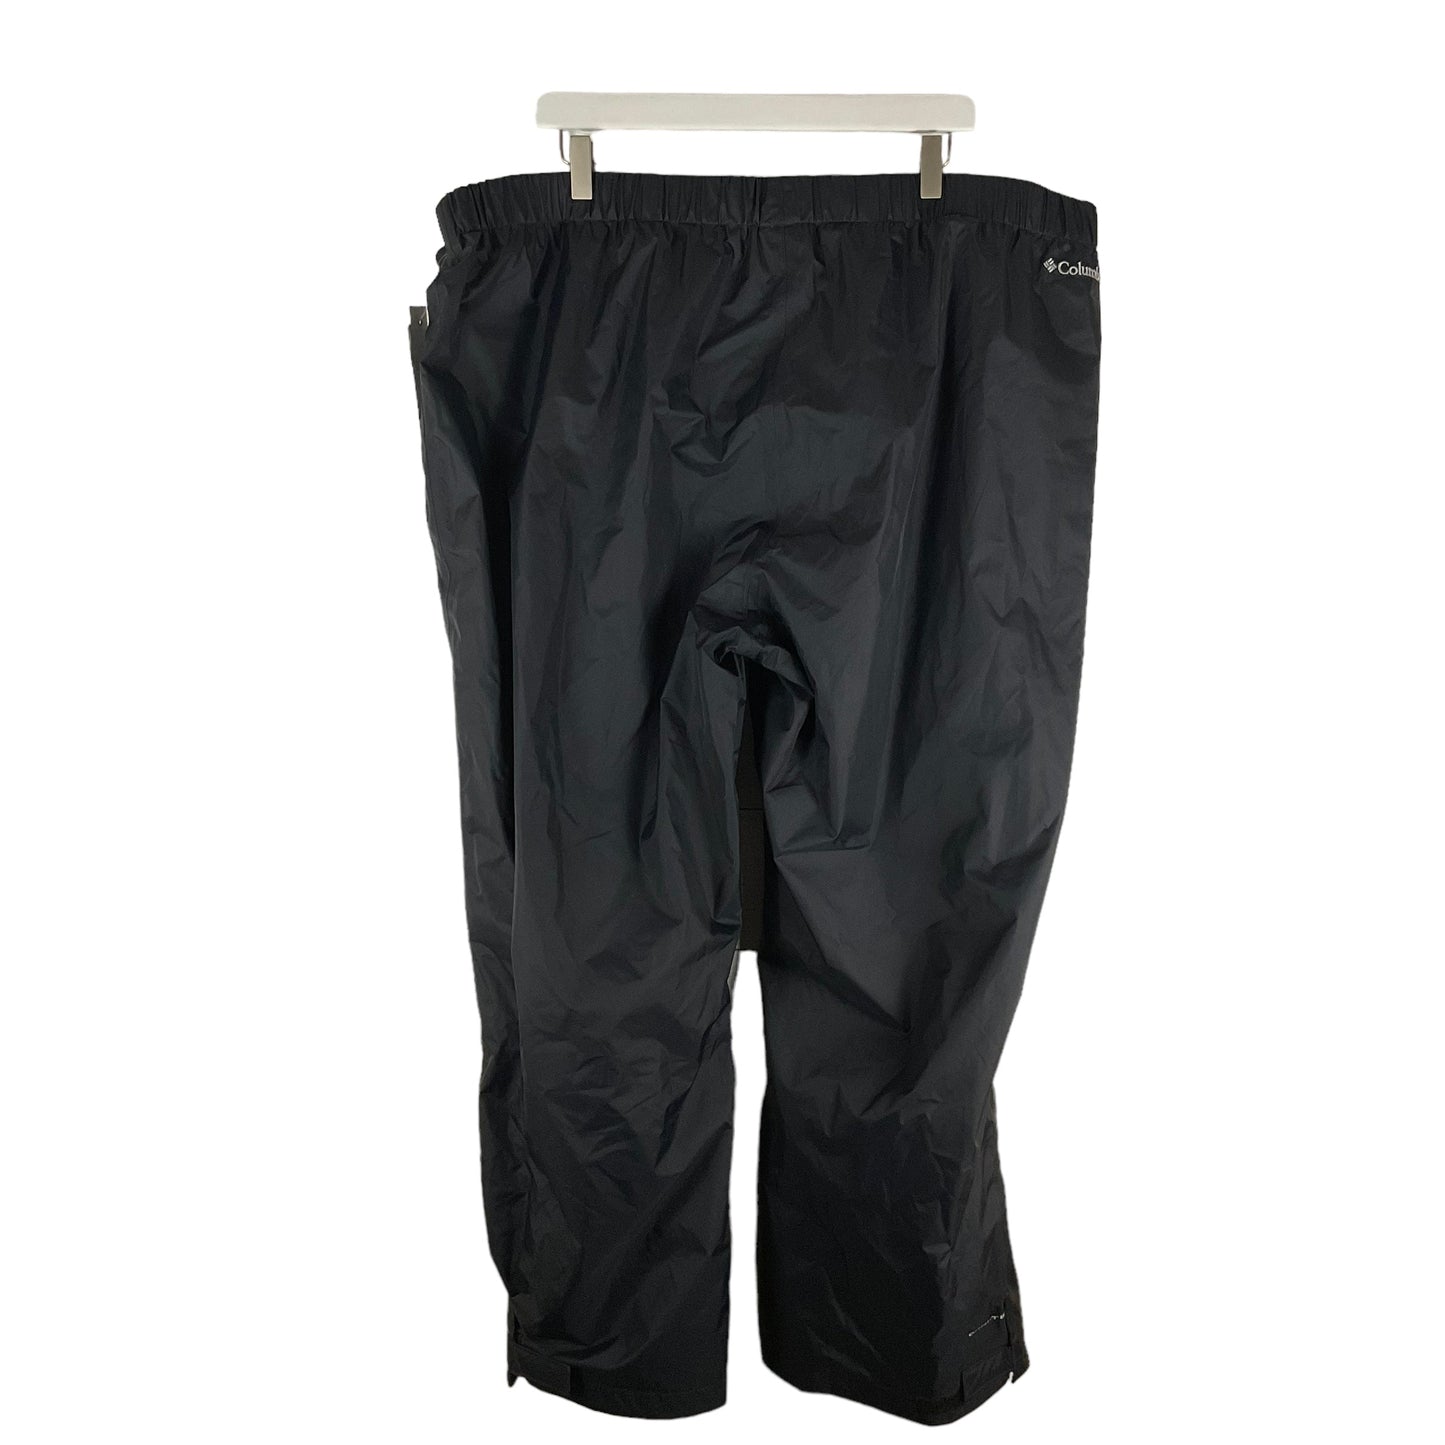 Athletic Pants By Columbia  Size: 3x